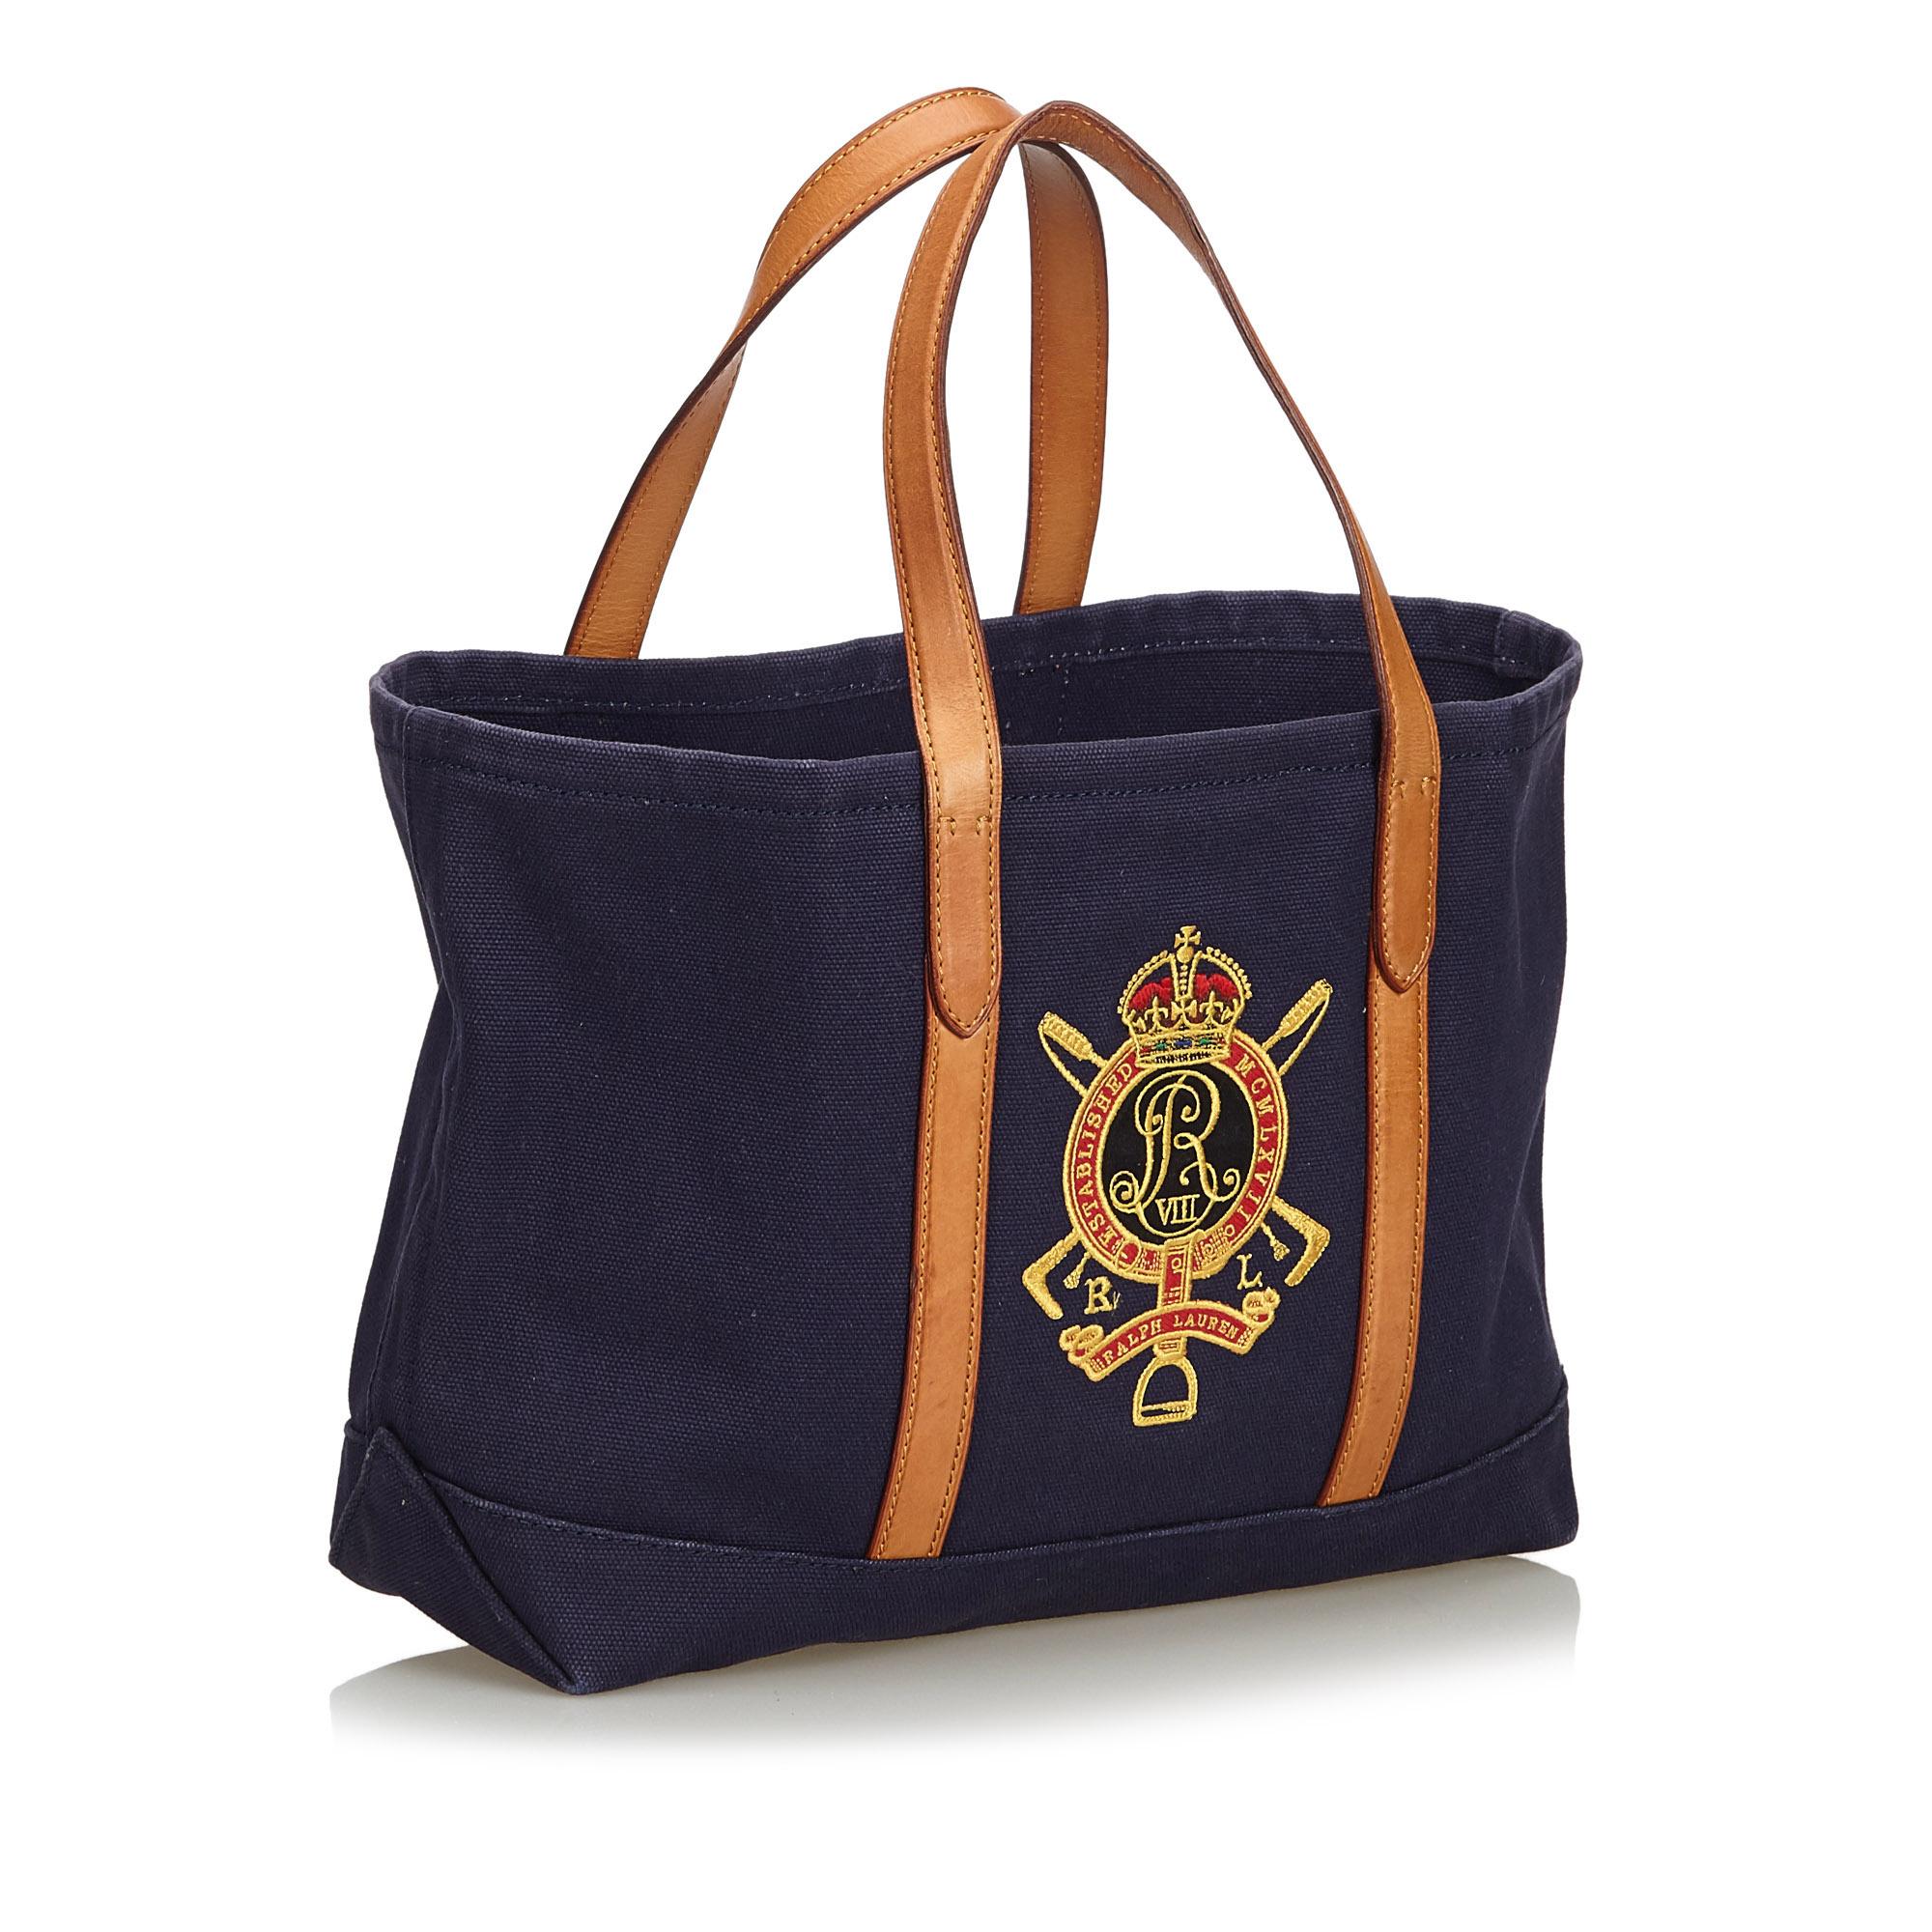 This tote bag features a canvas body with embroidered details and leather trim, flat leather straps, a top zip closure, and interior zip and slip pockets. It carries as B+ condition rating.

Inclusions: 
This item does not come with